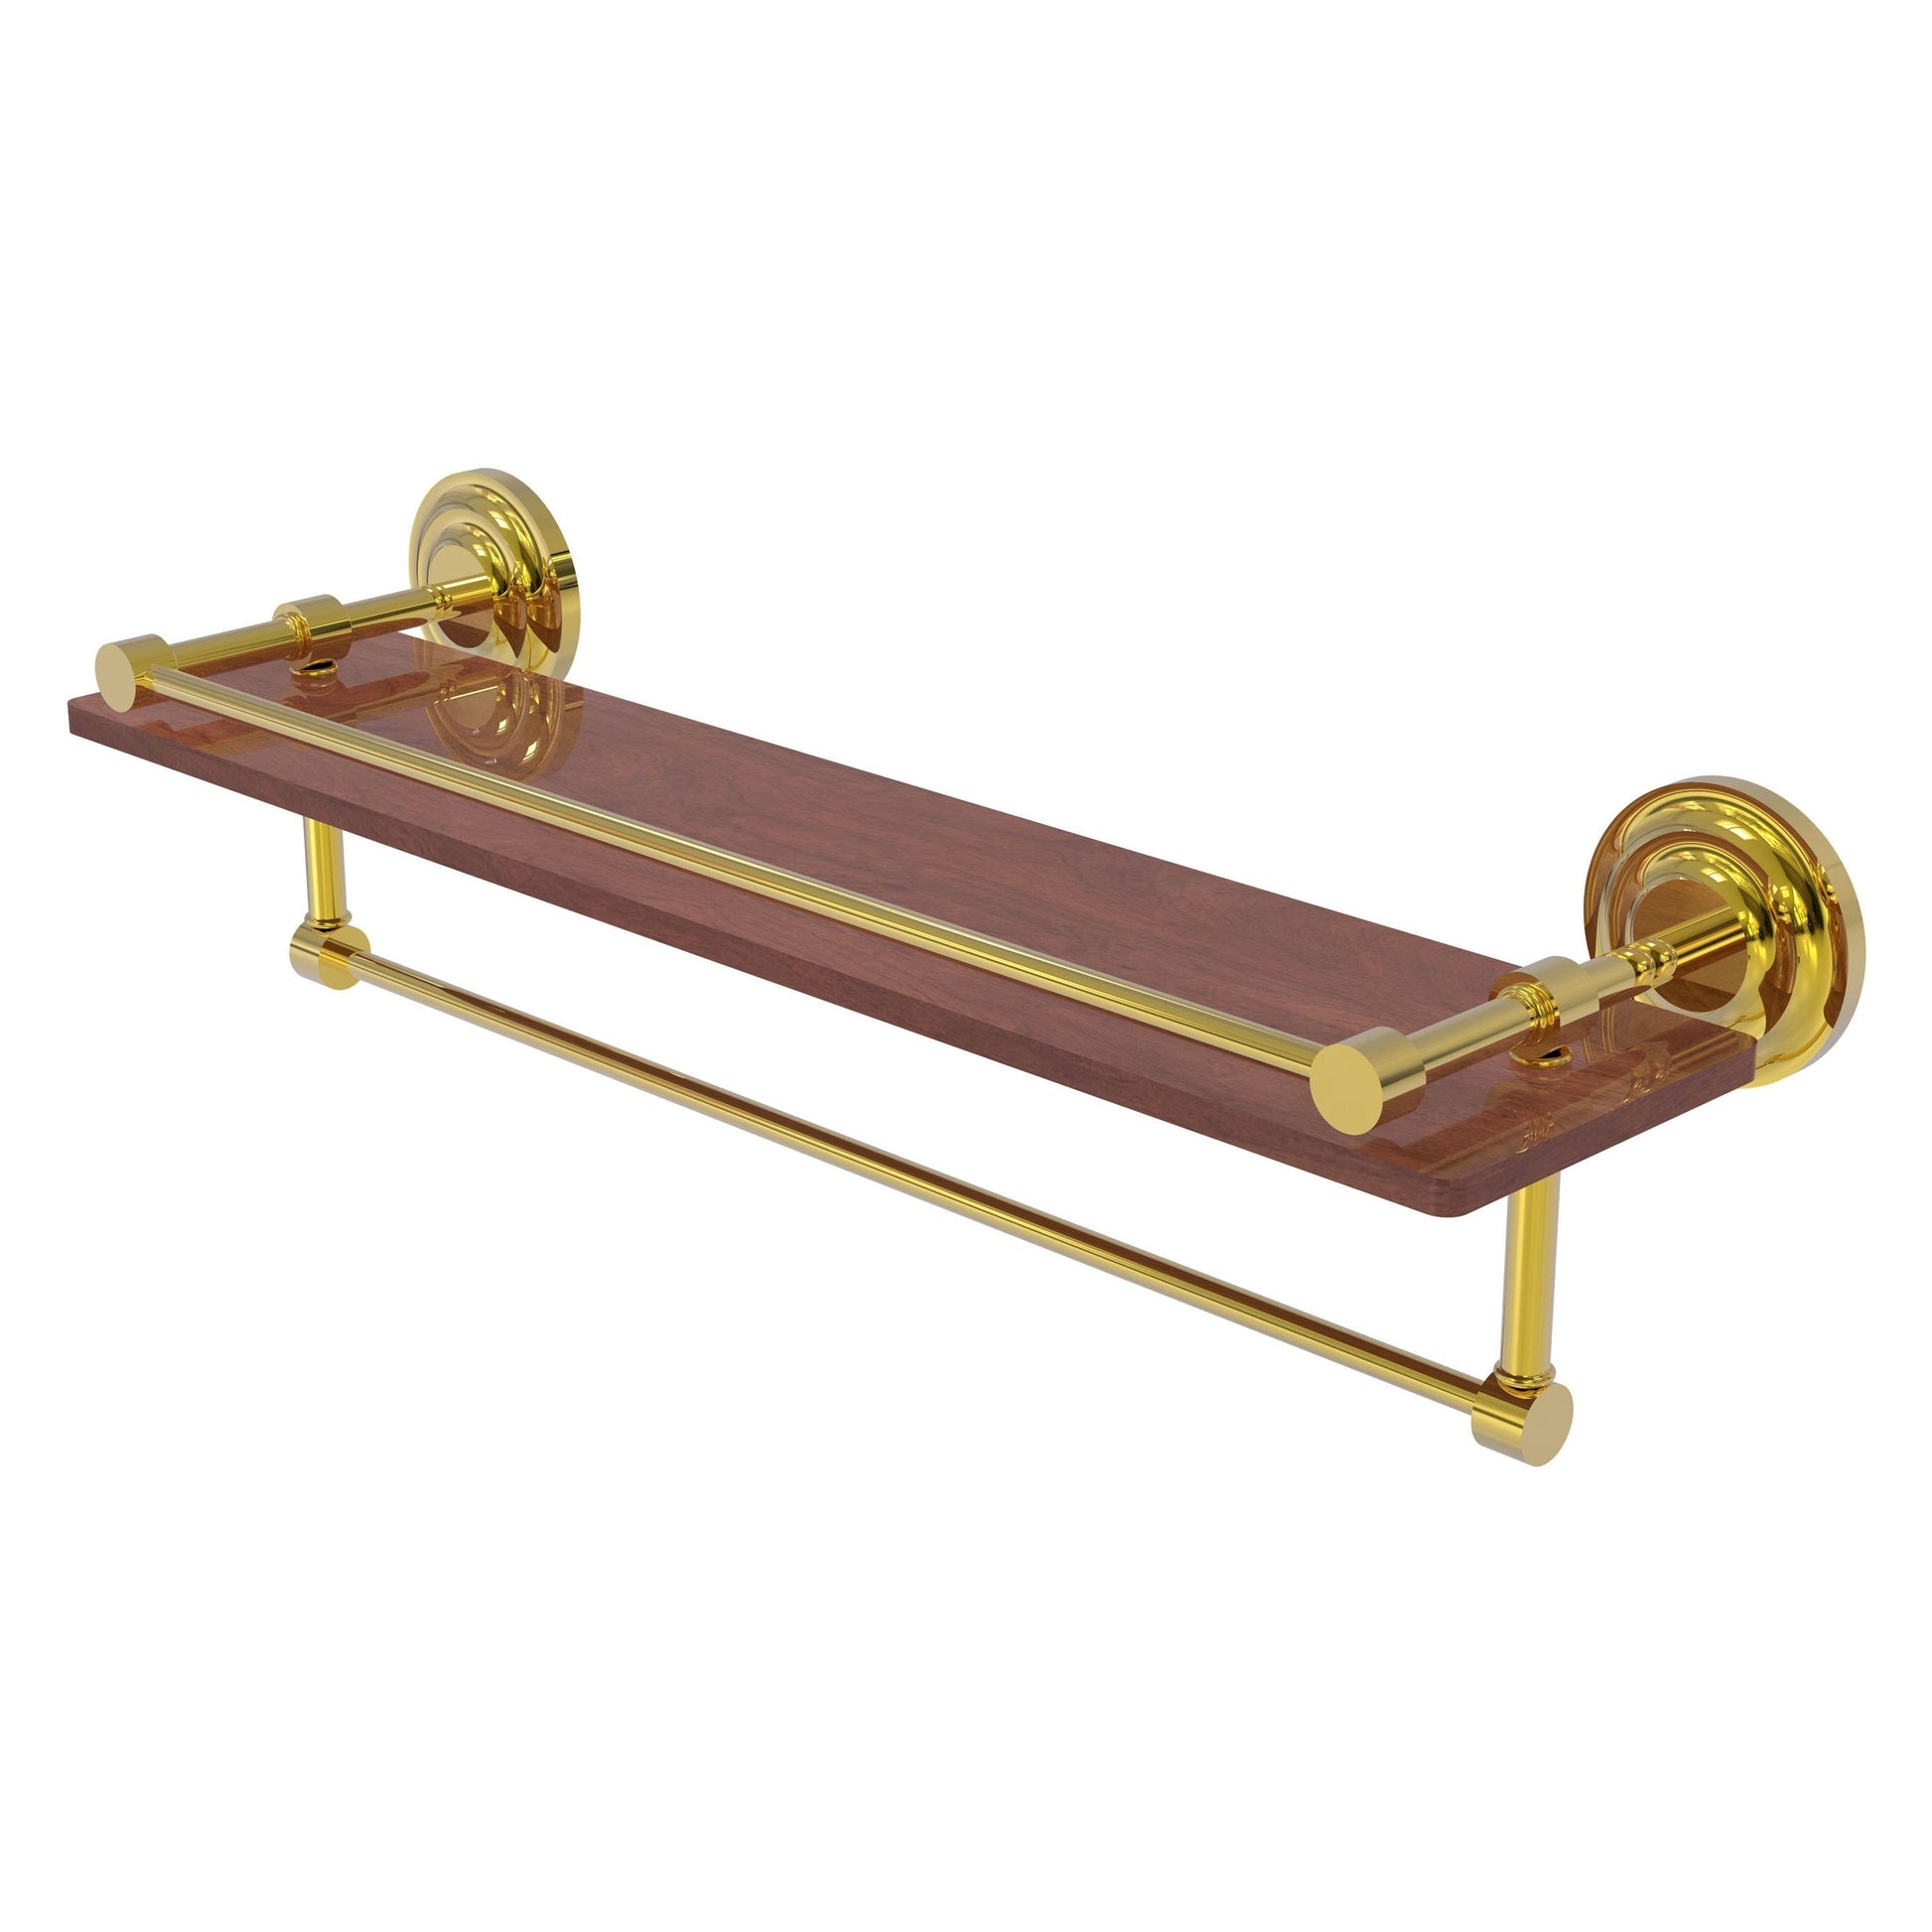 Allied Brass Que New 22" x 5" Polished Brass Solid Brass 22-Inch IPE Ironwood Shelf With Gallery Rail and Towel Bar